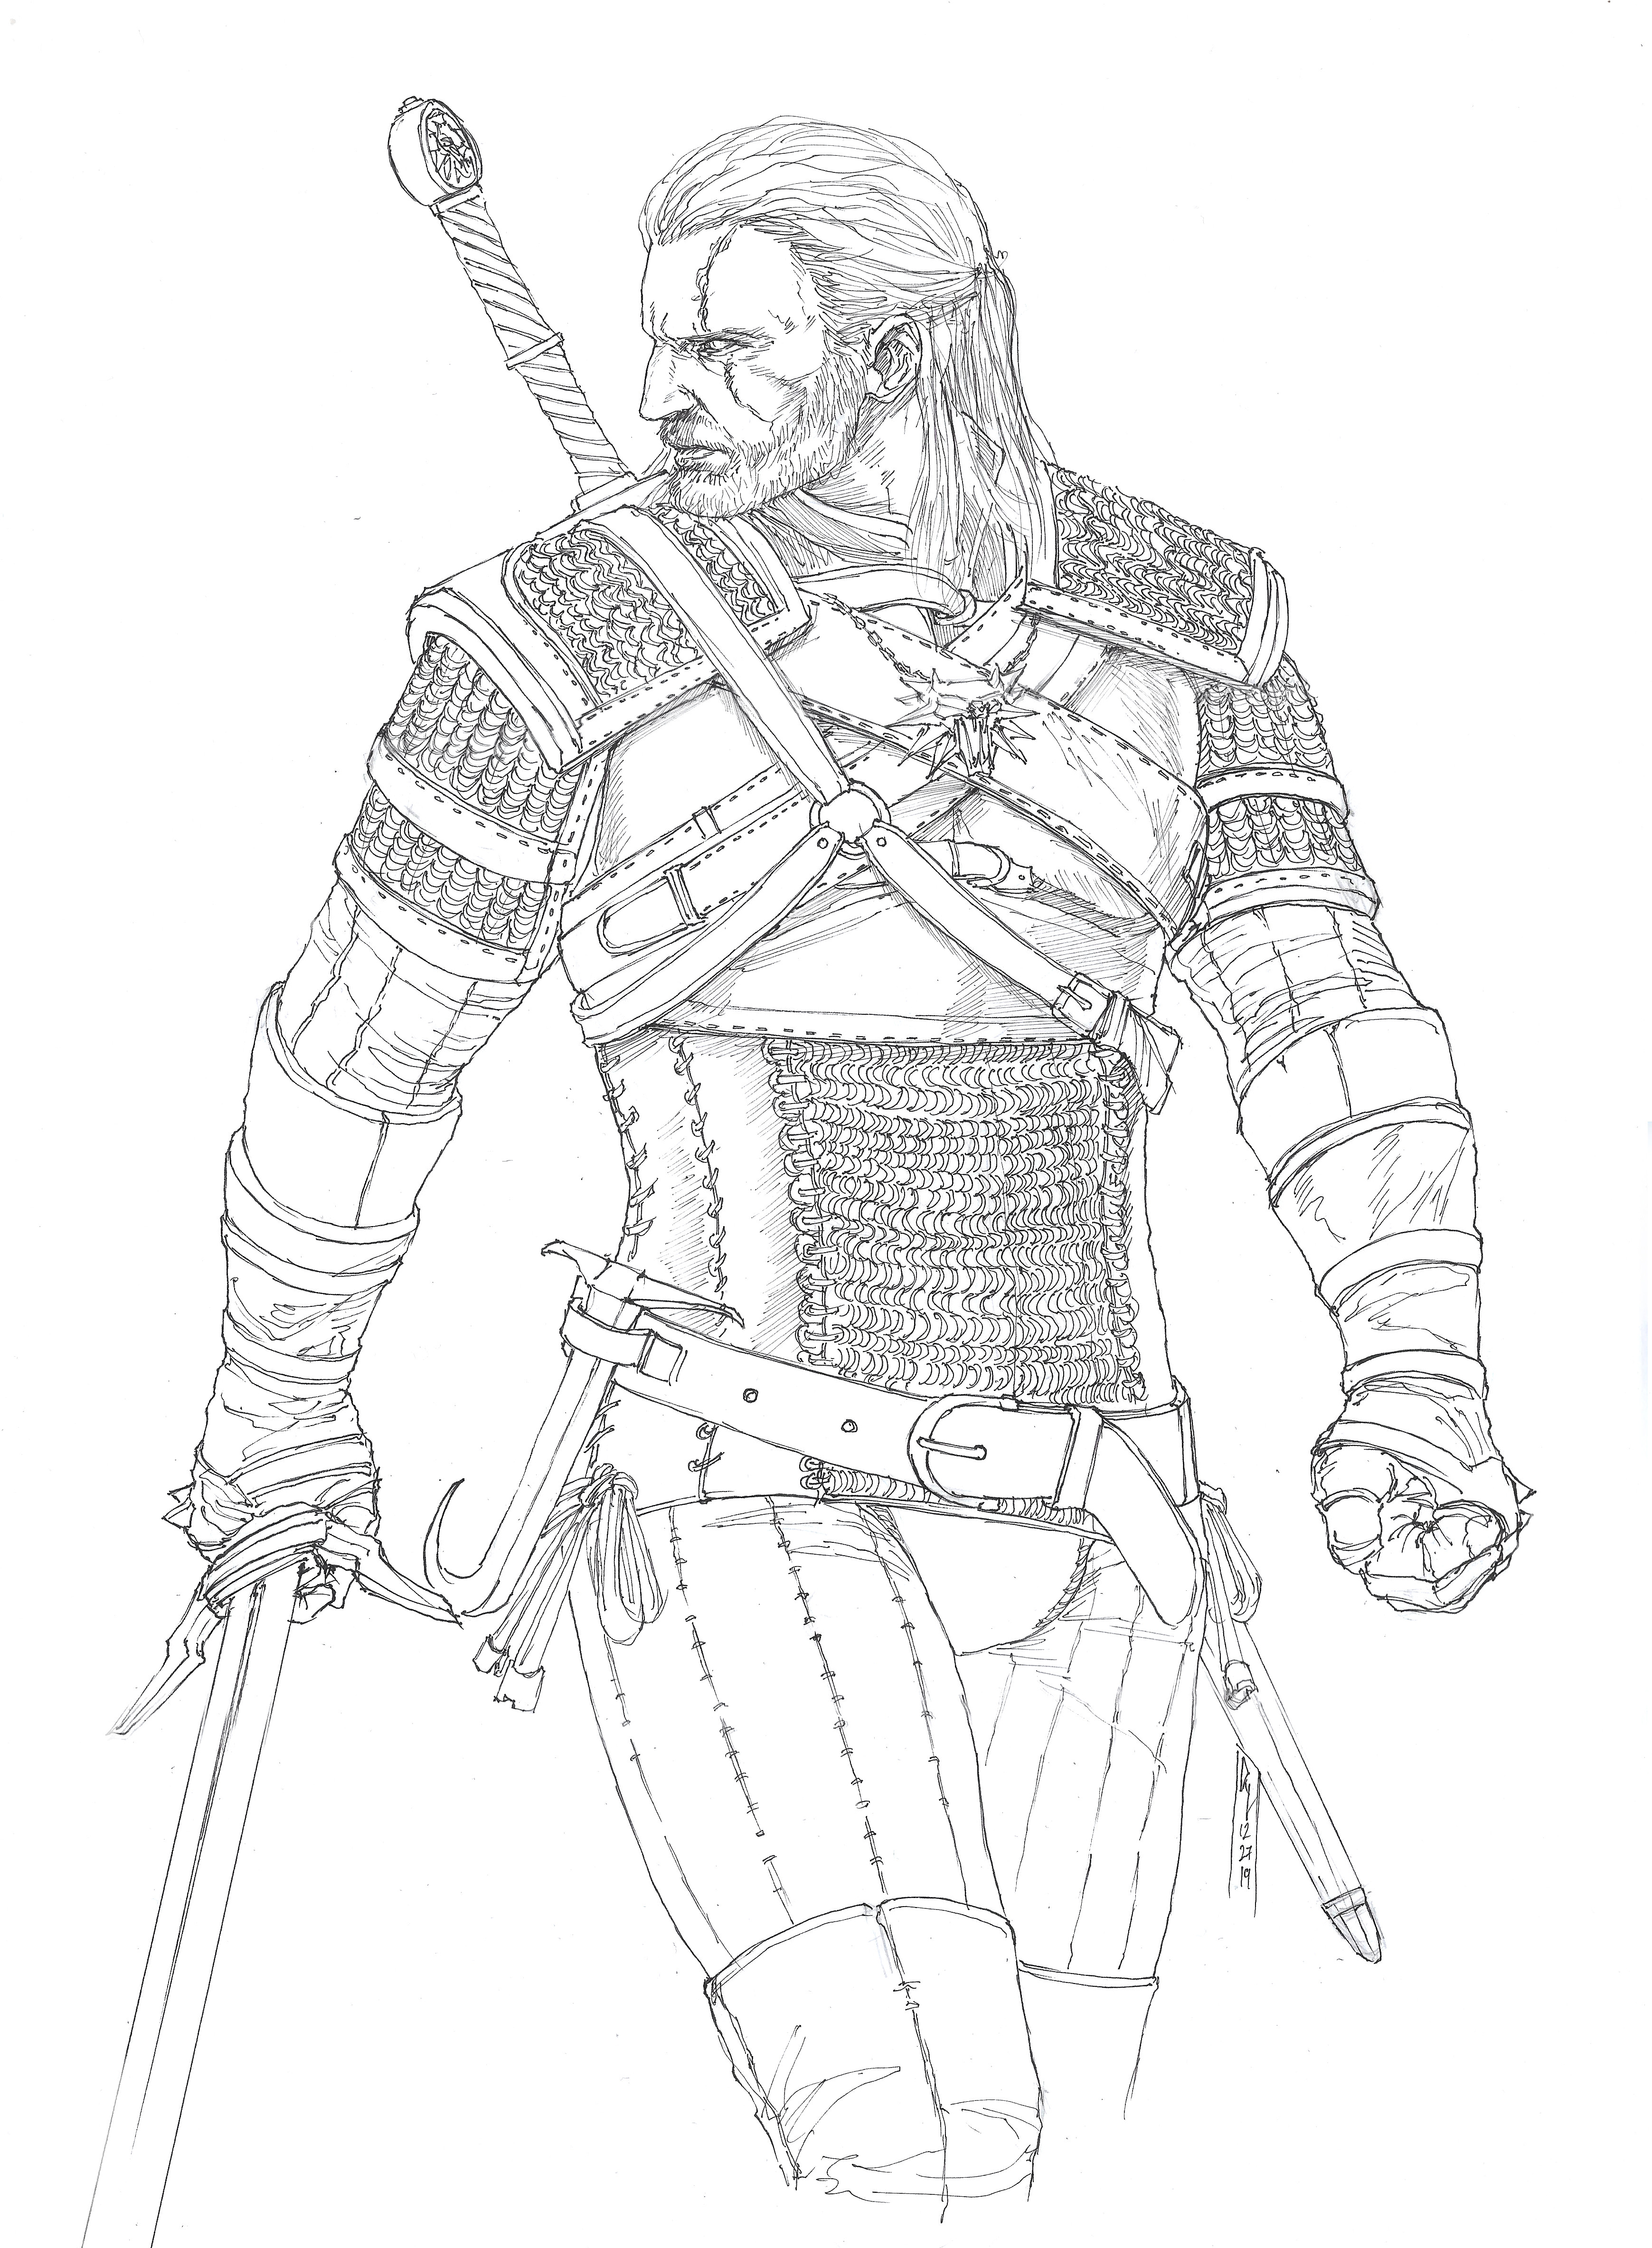 TamiArt — Here's a quickie of Geralt of Rivia. I really...